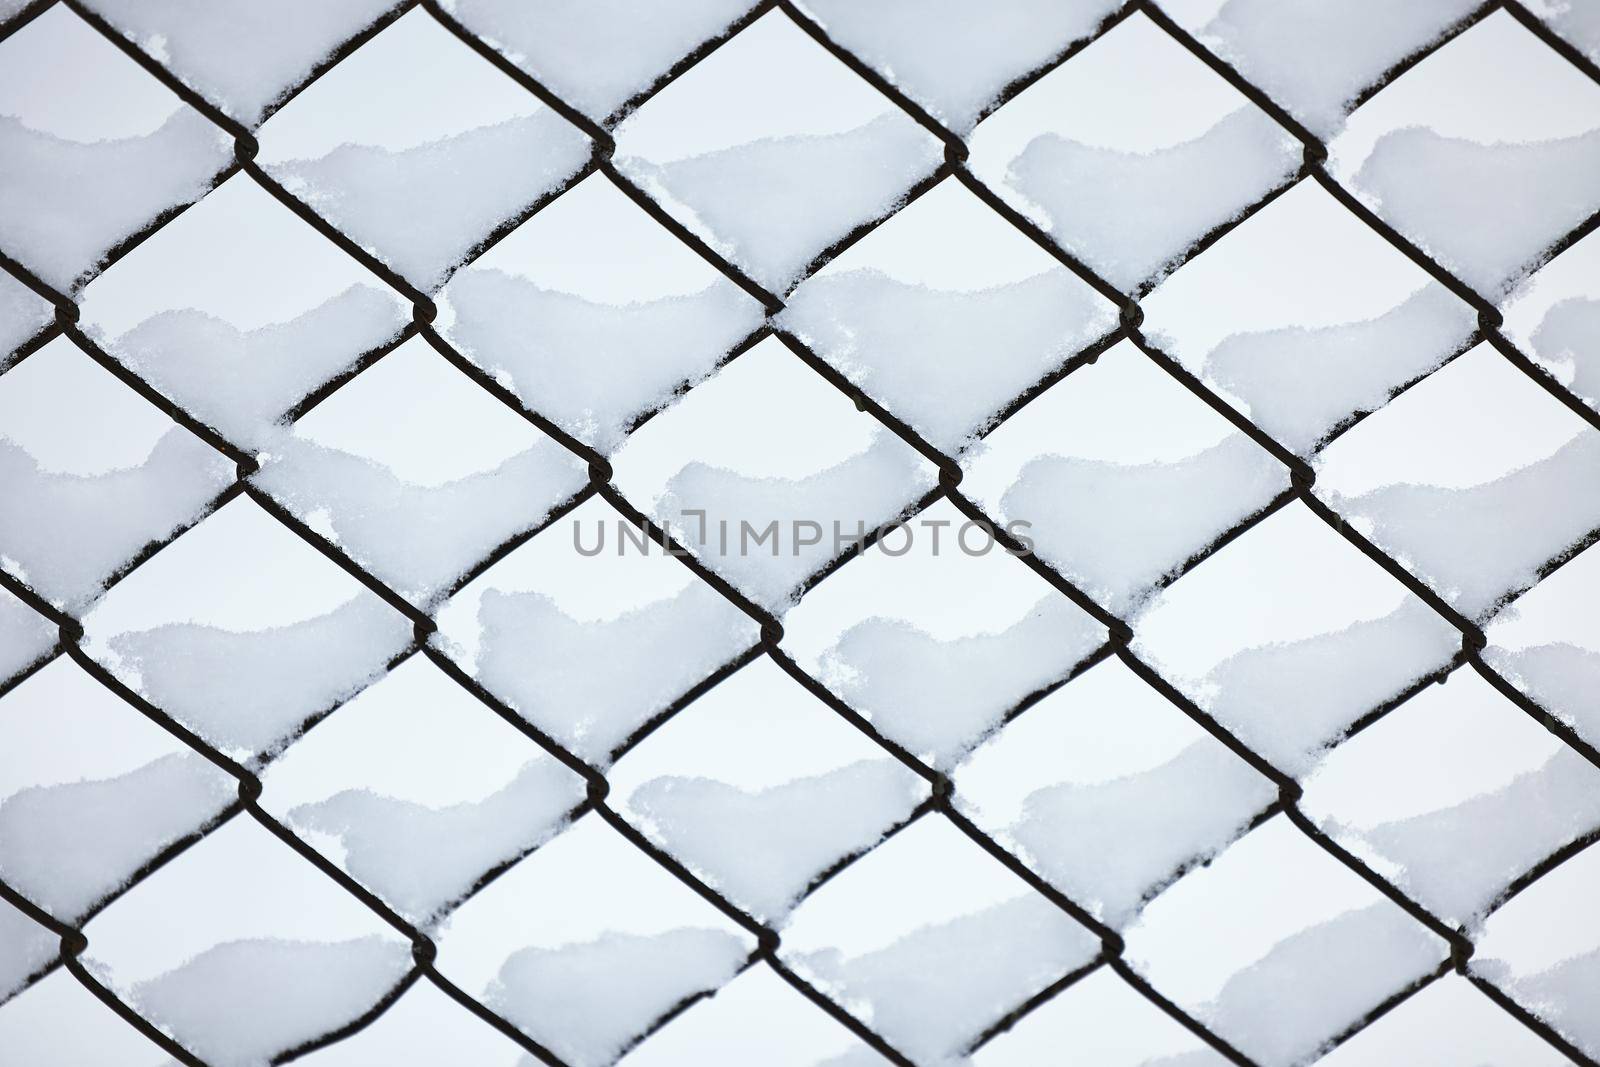 Snow on a mesh fence close-up, snow fence. Abstract winter background. Snow on a wire fence.